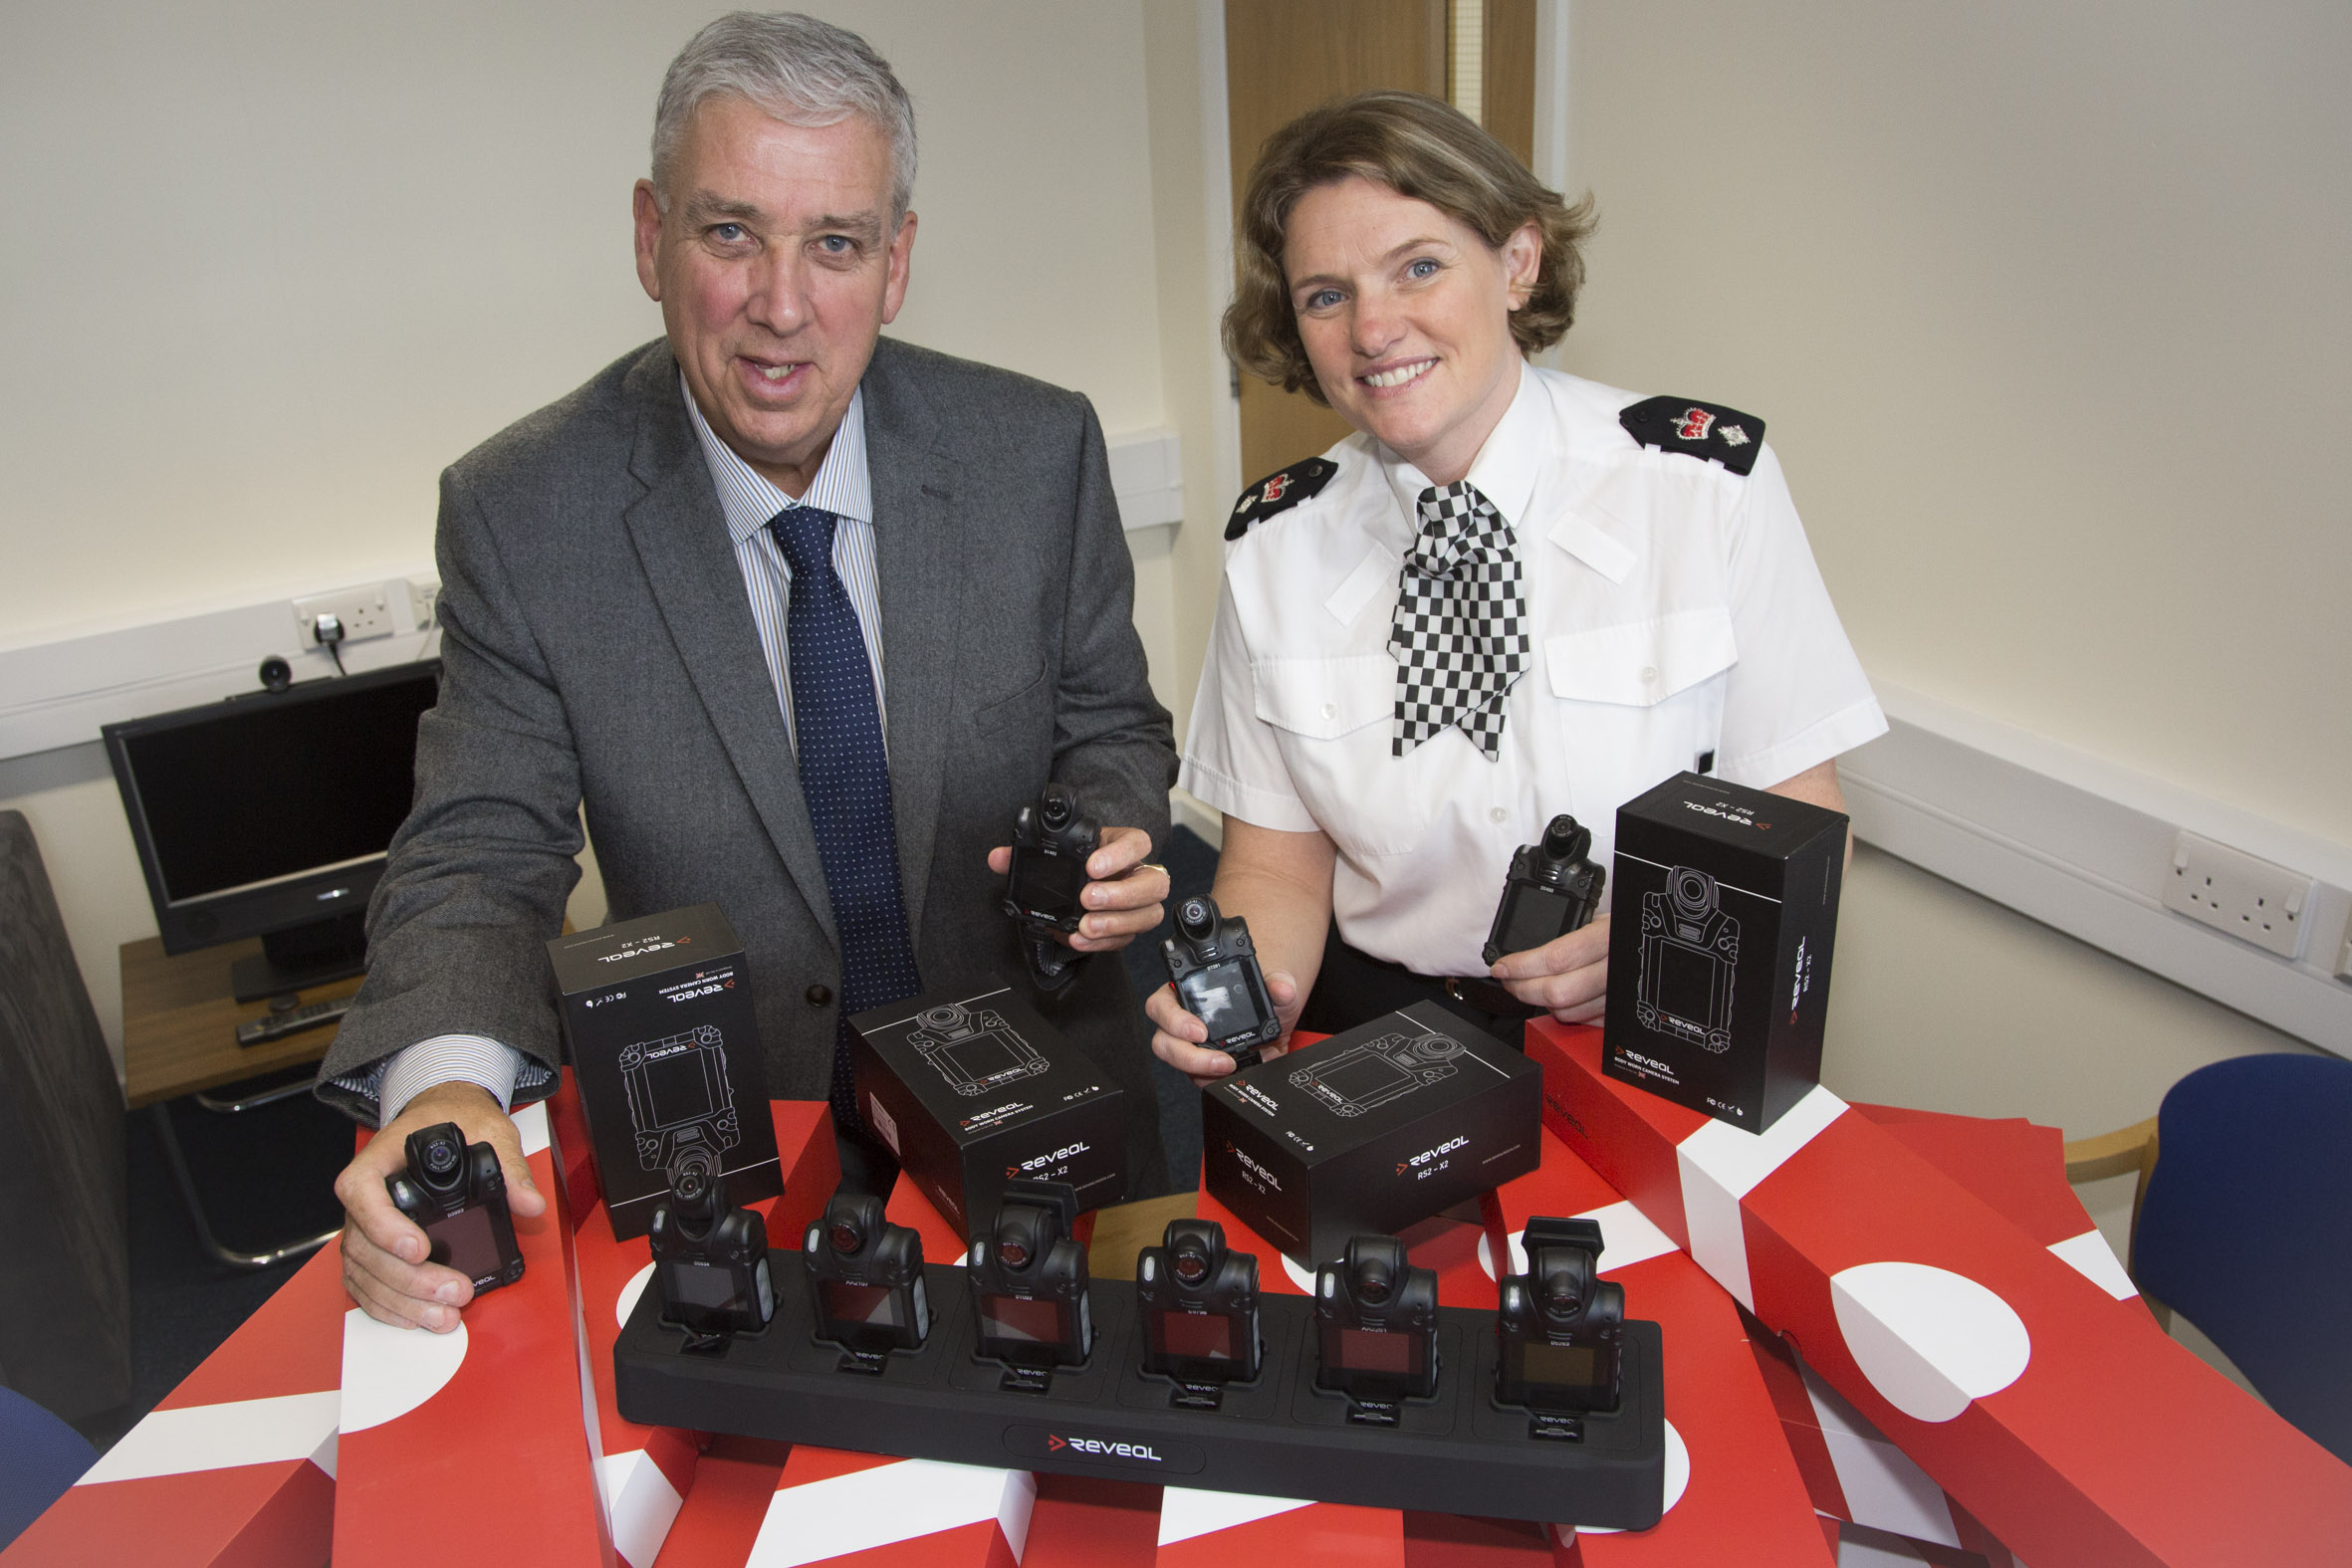 I’m proud body cams will save victims’ lives, says police boss